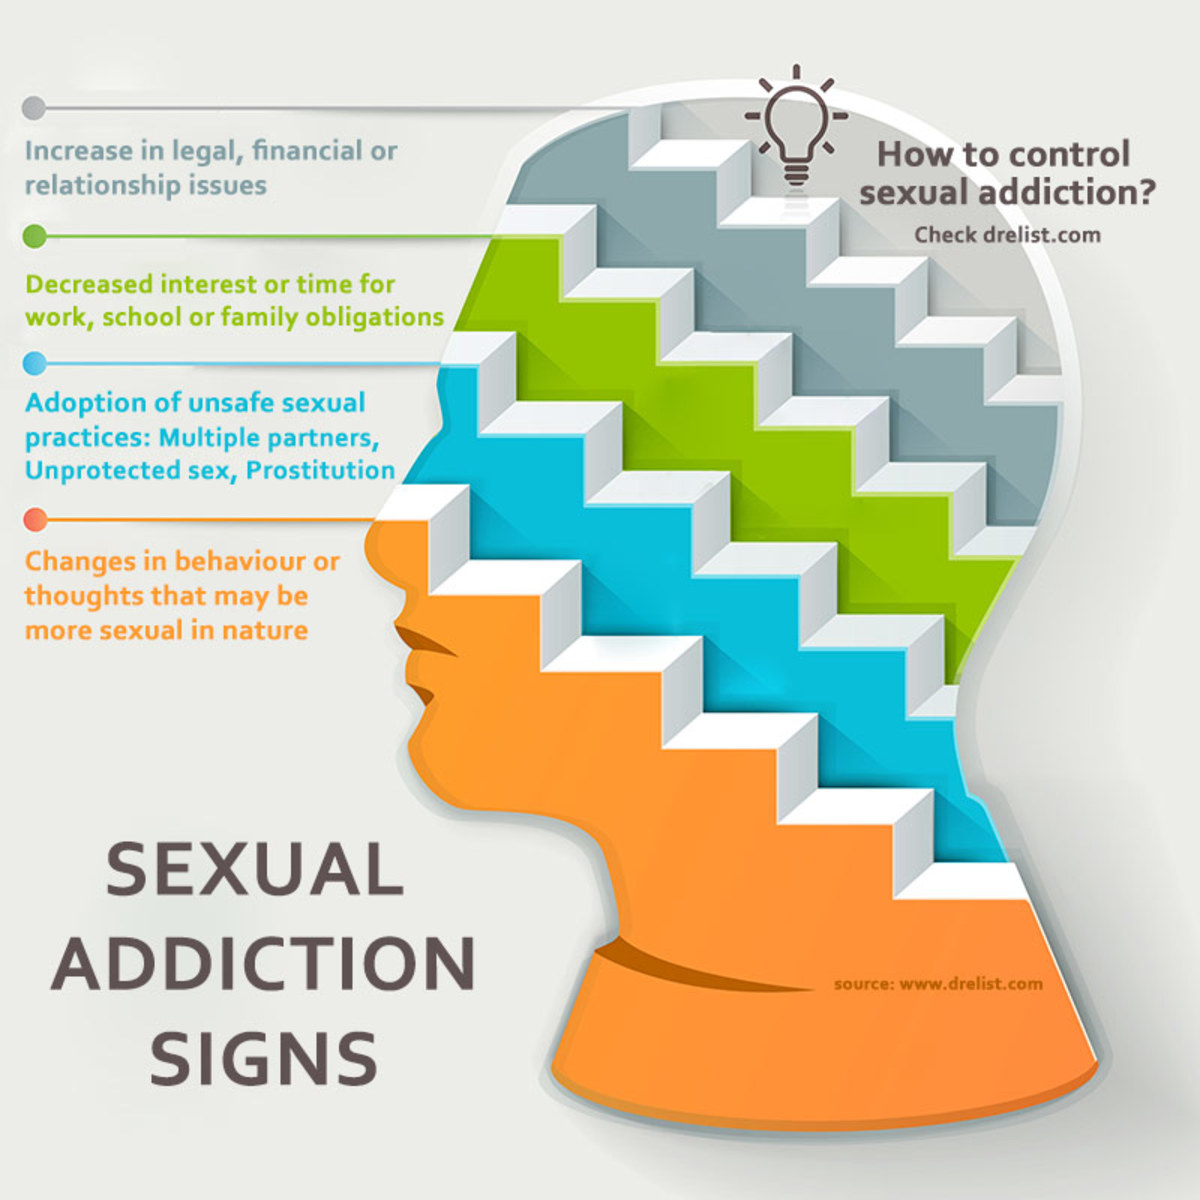 httppammorrishubpagescomhubhow-to-avoid-signs-and-symptoms-of-similar-types-of-addiction